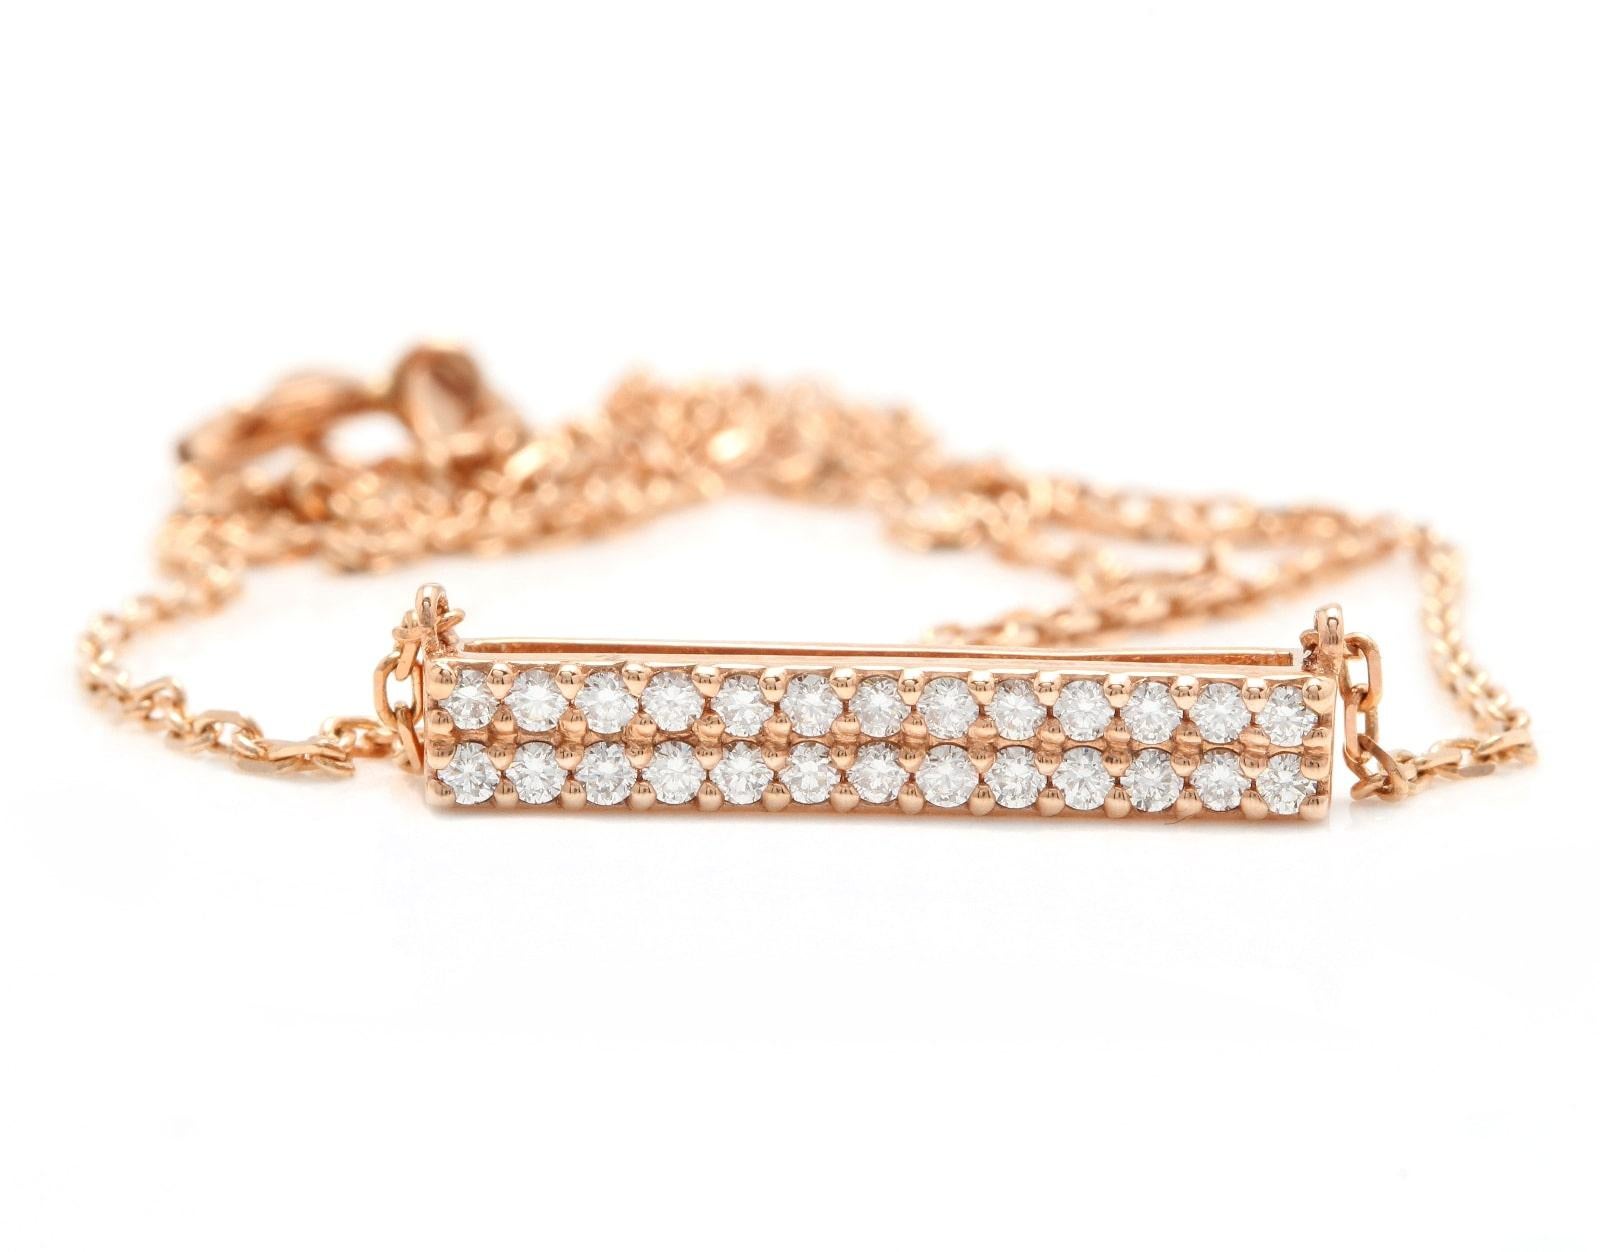 0.35Ct Splendid 14K Solid Rose Gold Bar Necklace

Amazing looking piece! 

Stamped: 14k

Total Natural Round Diamond Weight is: Approx. 0.35 Carats (G-H / SI1-SI2)

Chain Length is: 16 inches (can adjusted to 14